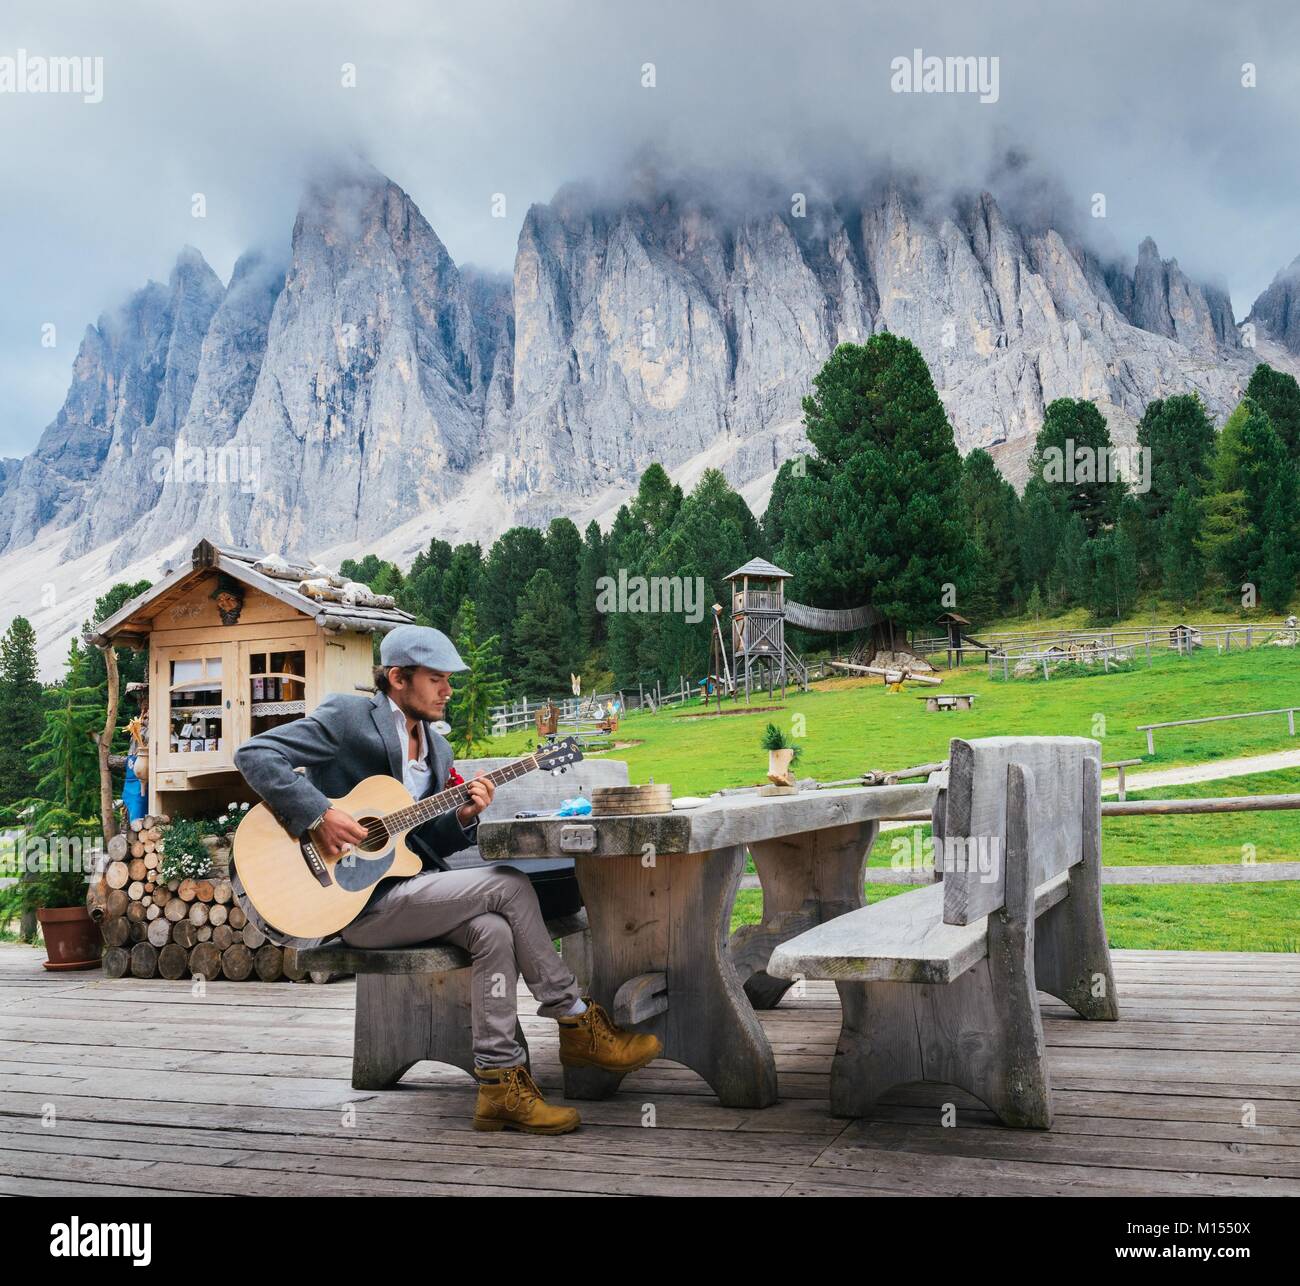 Dolomites, Italy - September 9th, 2017: Young well-dressed man 30-35 playing a guitar with Italian Dolomites rock formation background Stock Photo